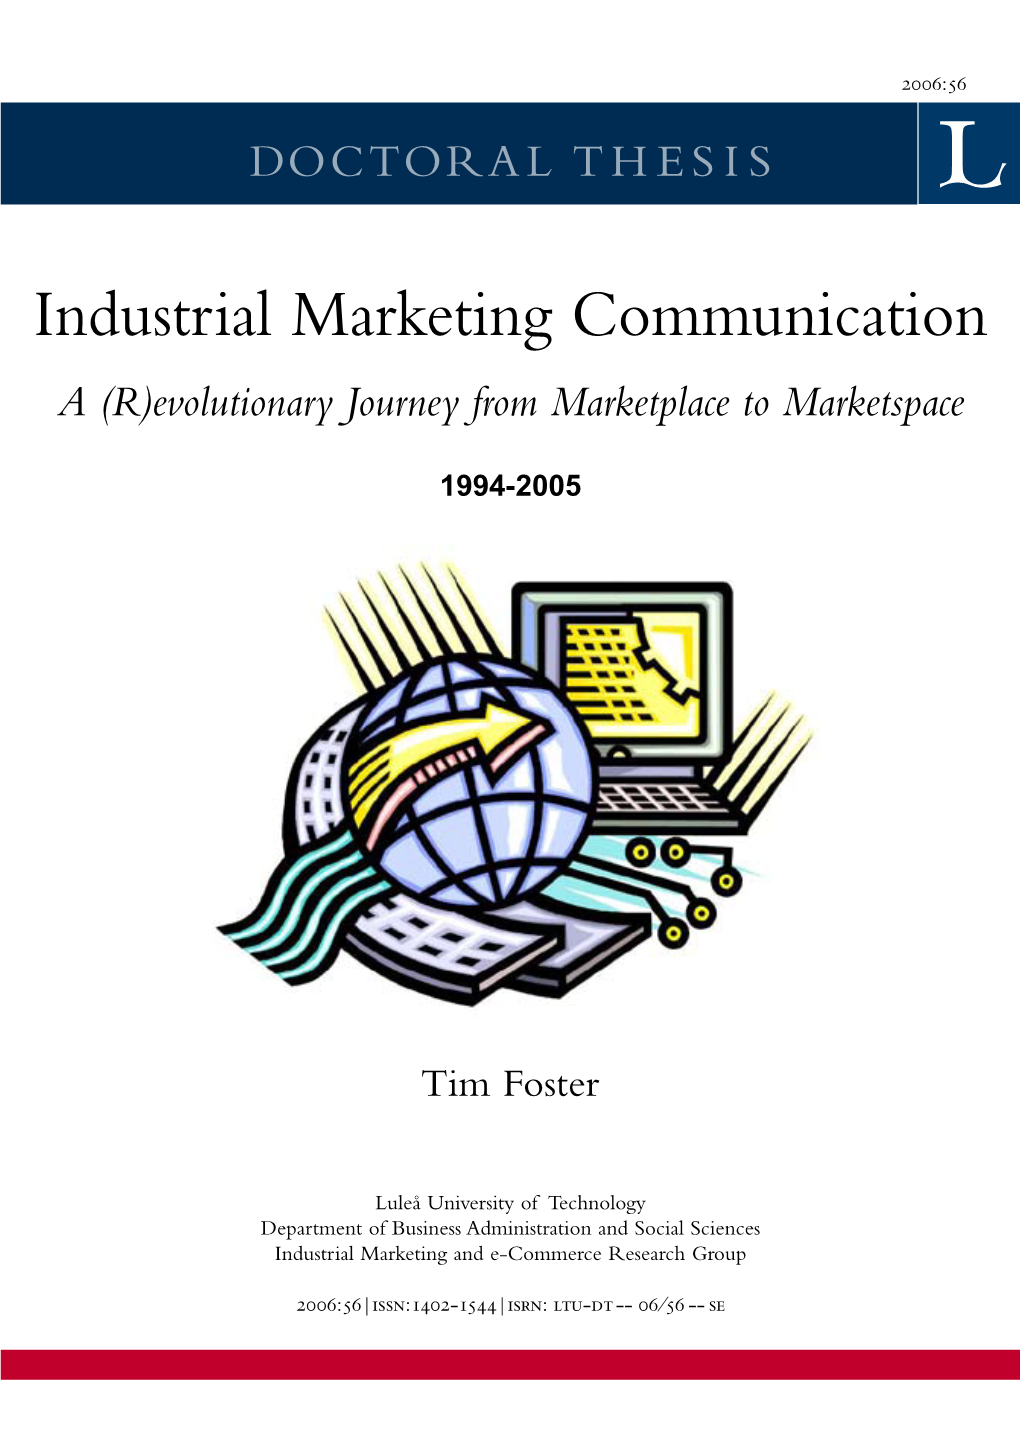 Industrial Marketing Communication a (R)Evolutionary Journey from Marketplace to Marketspace